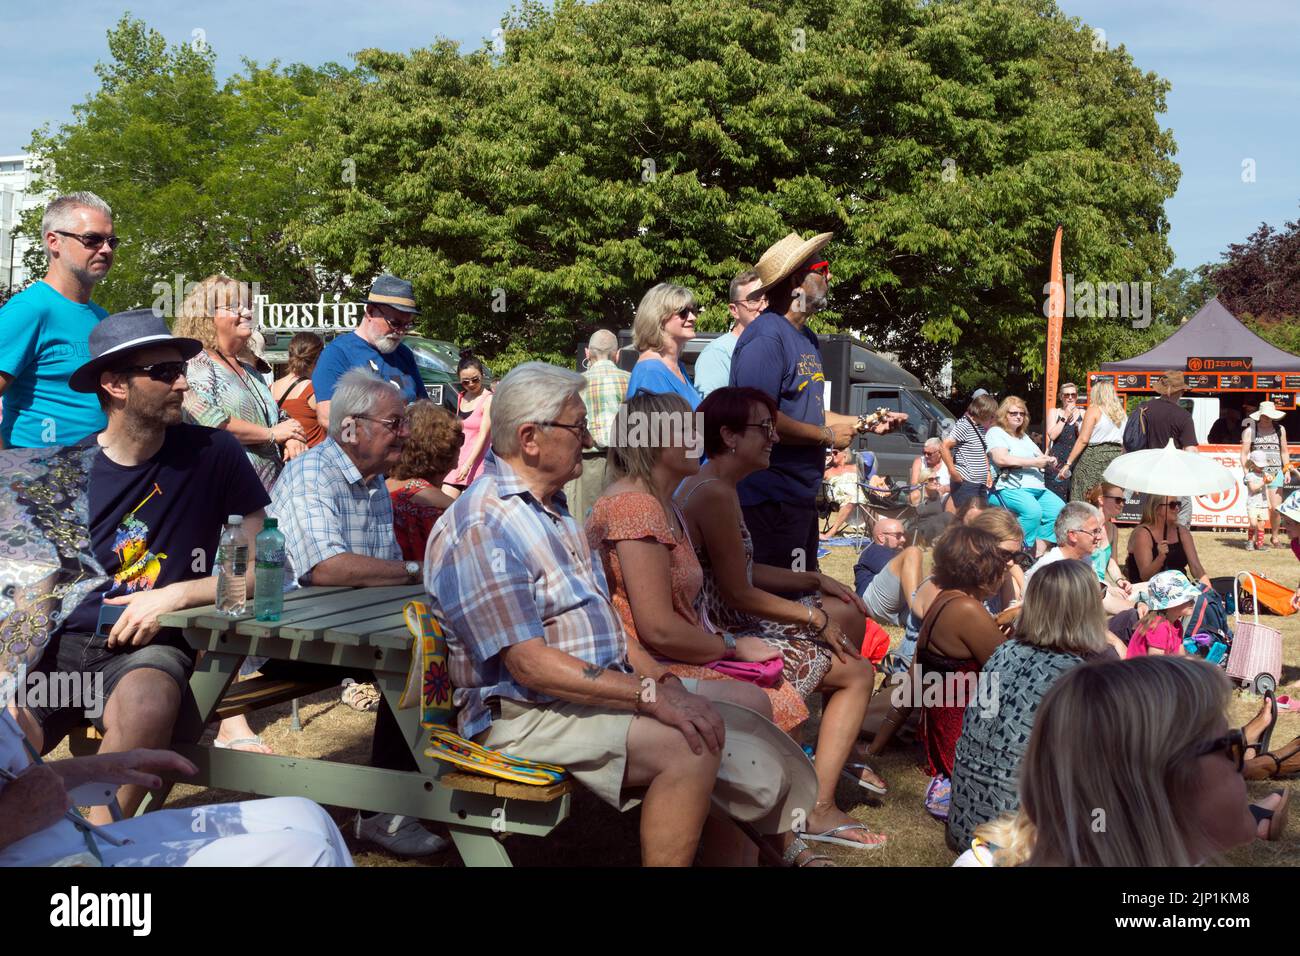 People watching music performers at Art in the Park, Leamington Spa, Warwickshire, UK. August 2022 Stock Photo